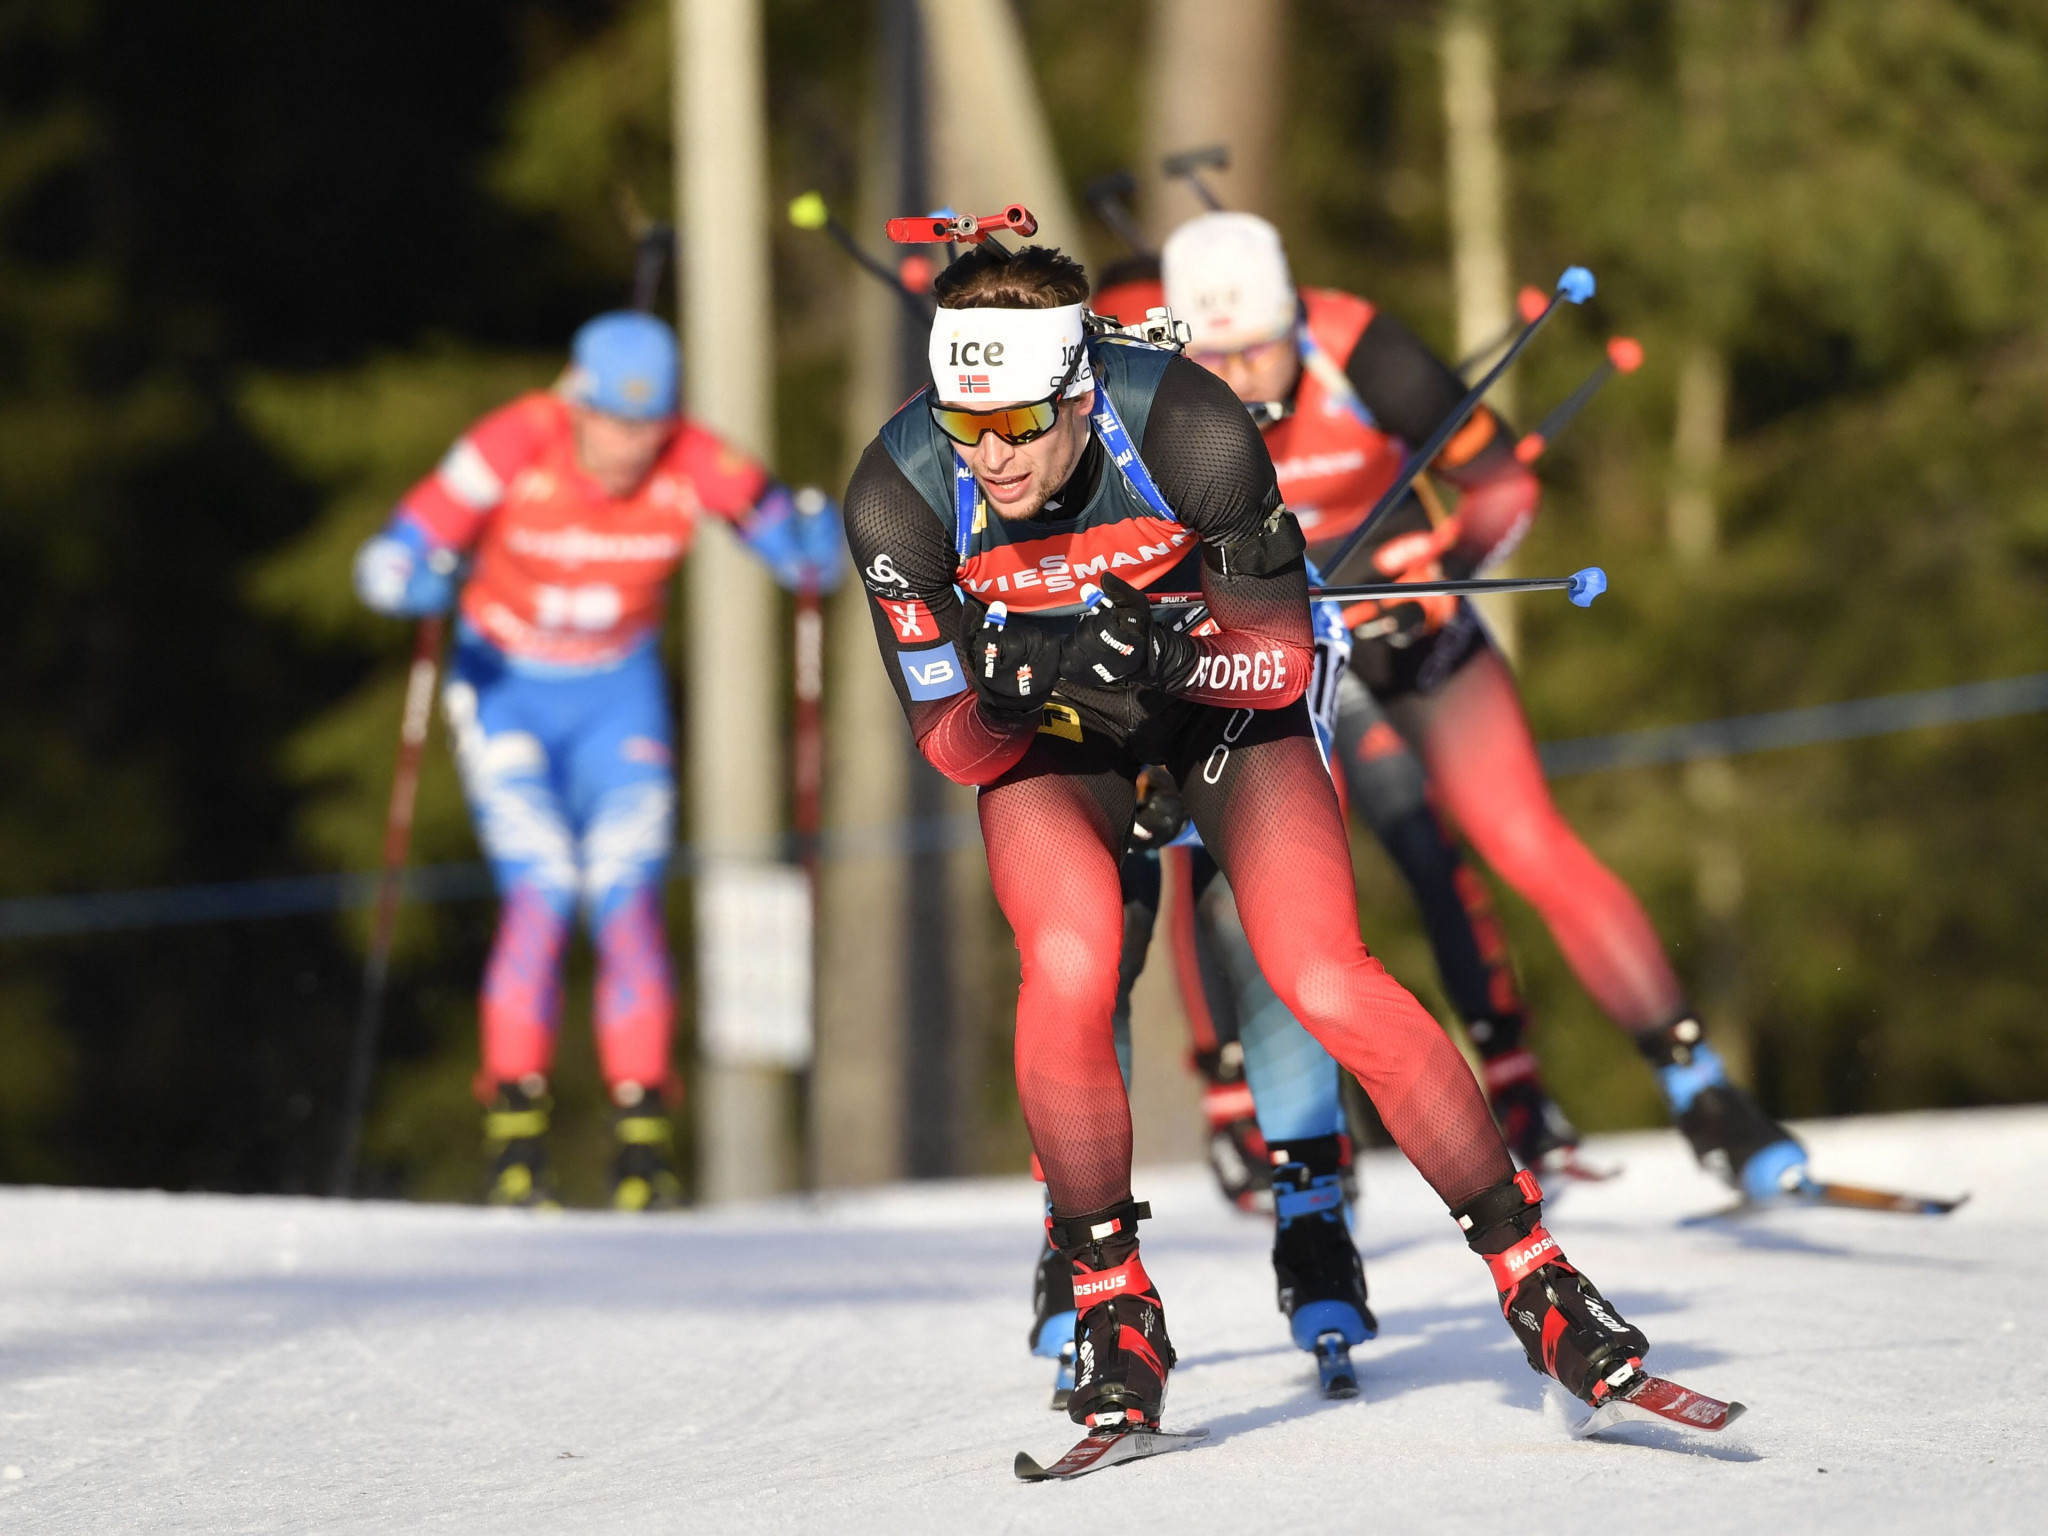 The IBU are confident that its new World Cup season will go ahead as planned, despite the surging number of COVID-19 cases in Europe ©Getty Images